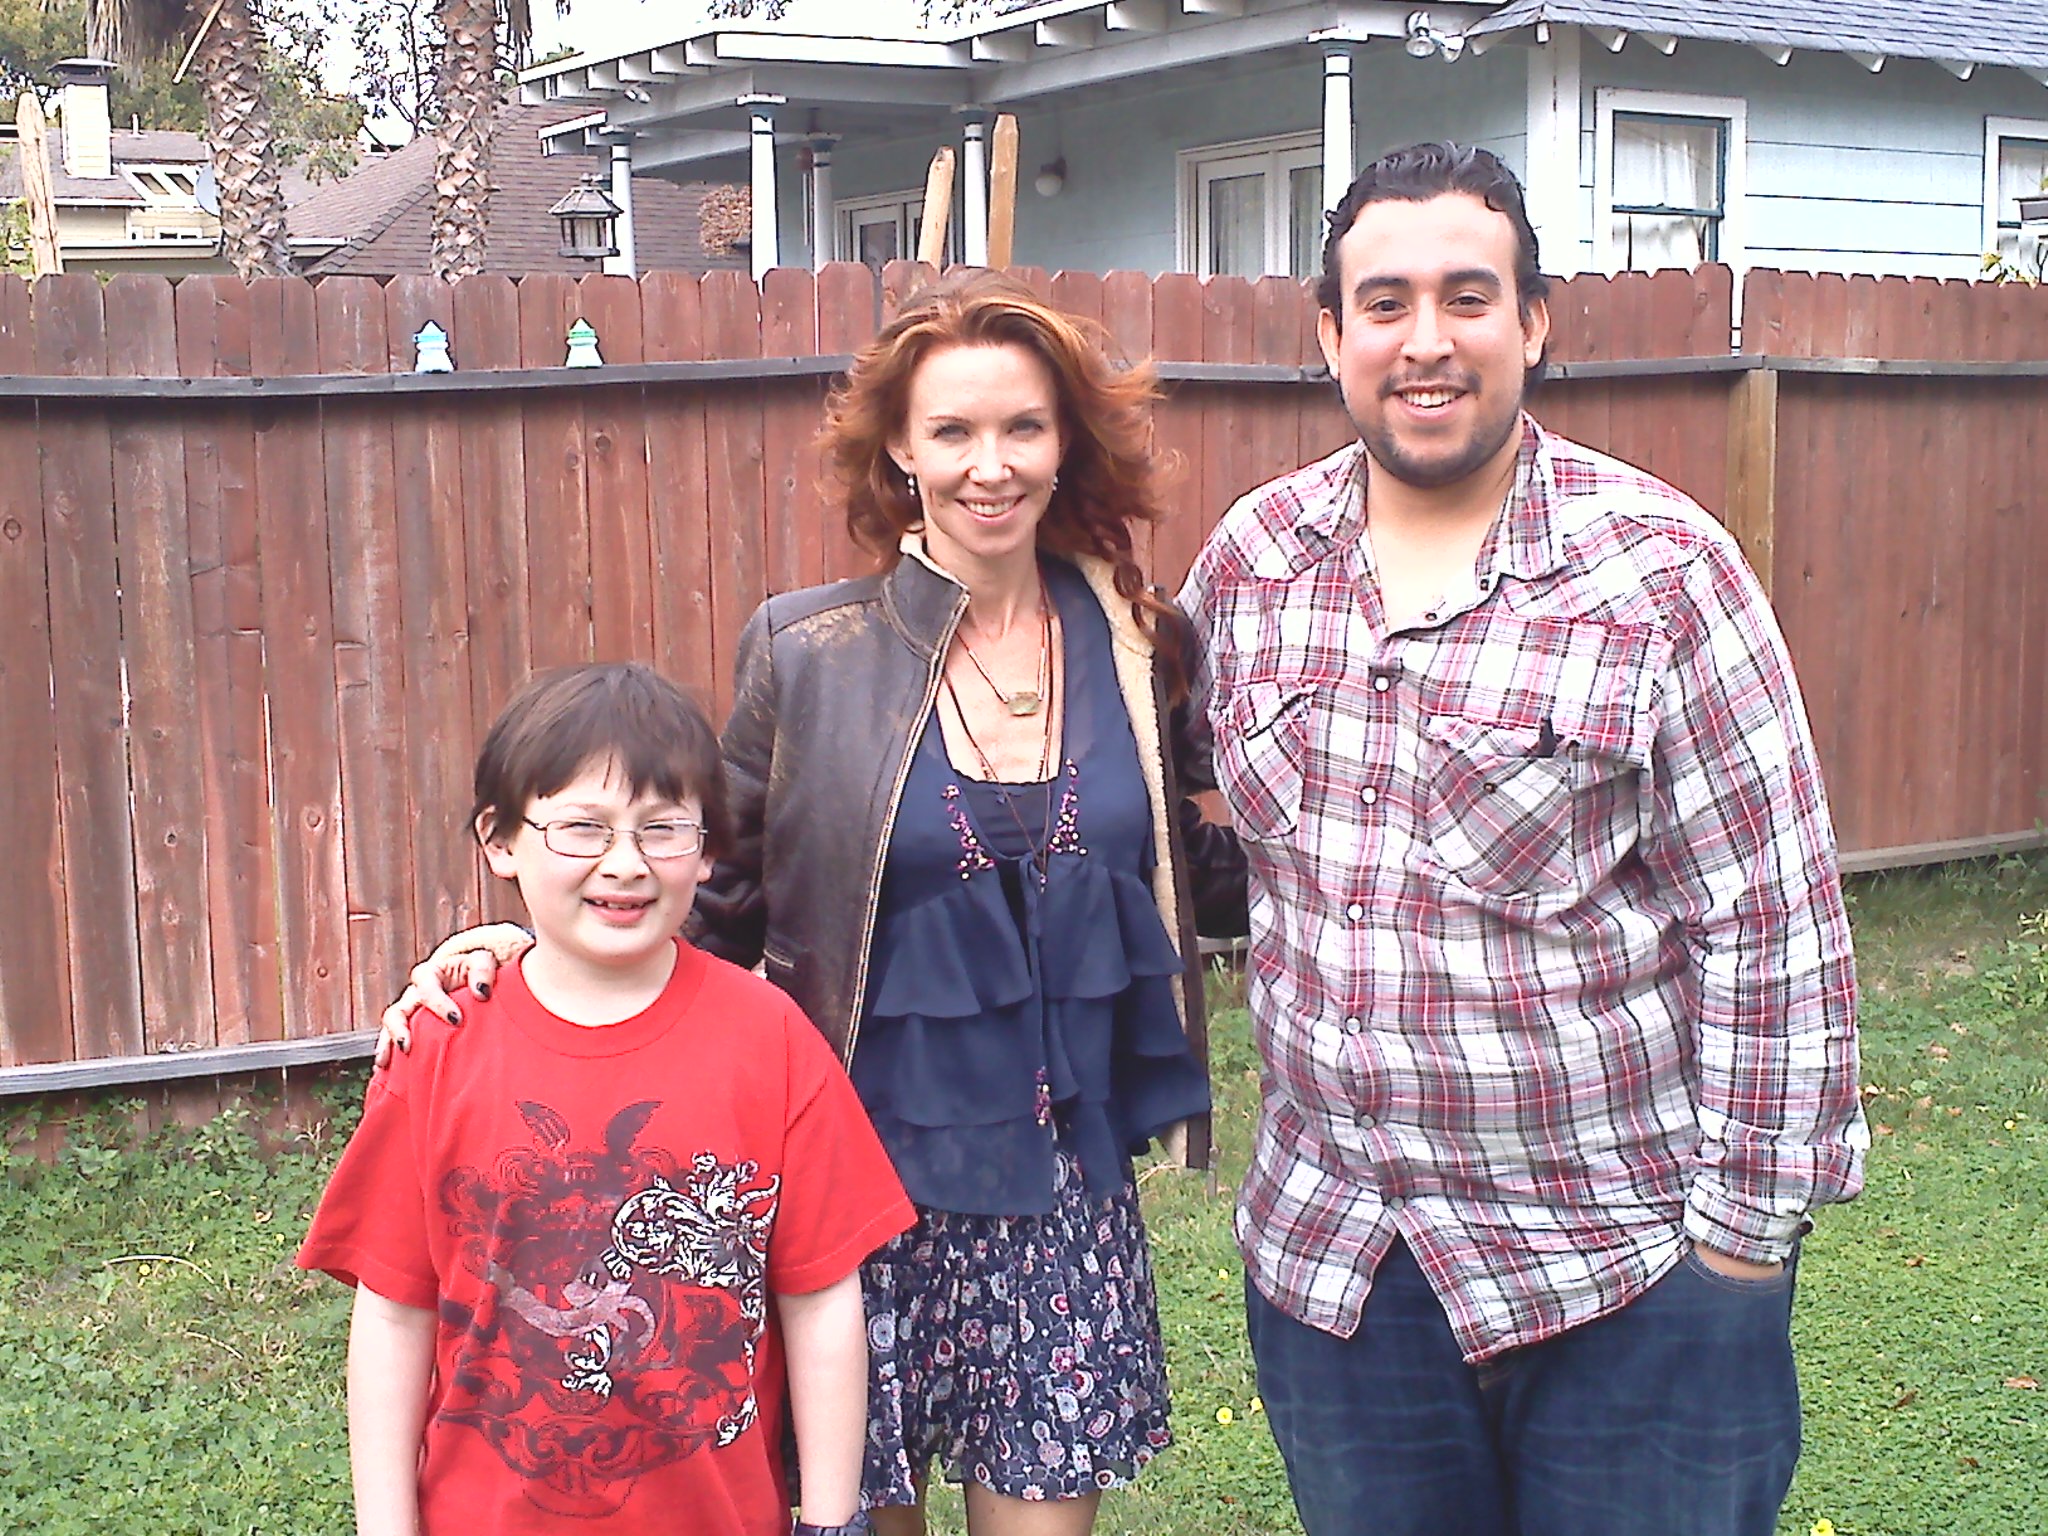 Matthew Wayne, on set of Indie Feature Film: Revolution, with onscreen mom, actress: Challen Cates and director: Michael Cruz. February, 2011.